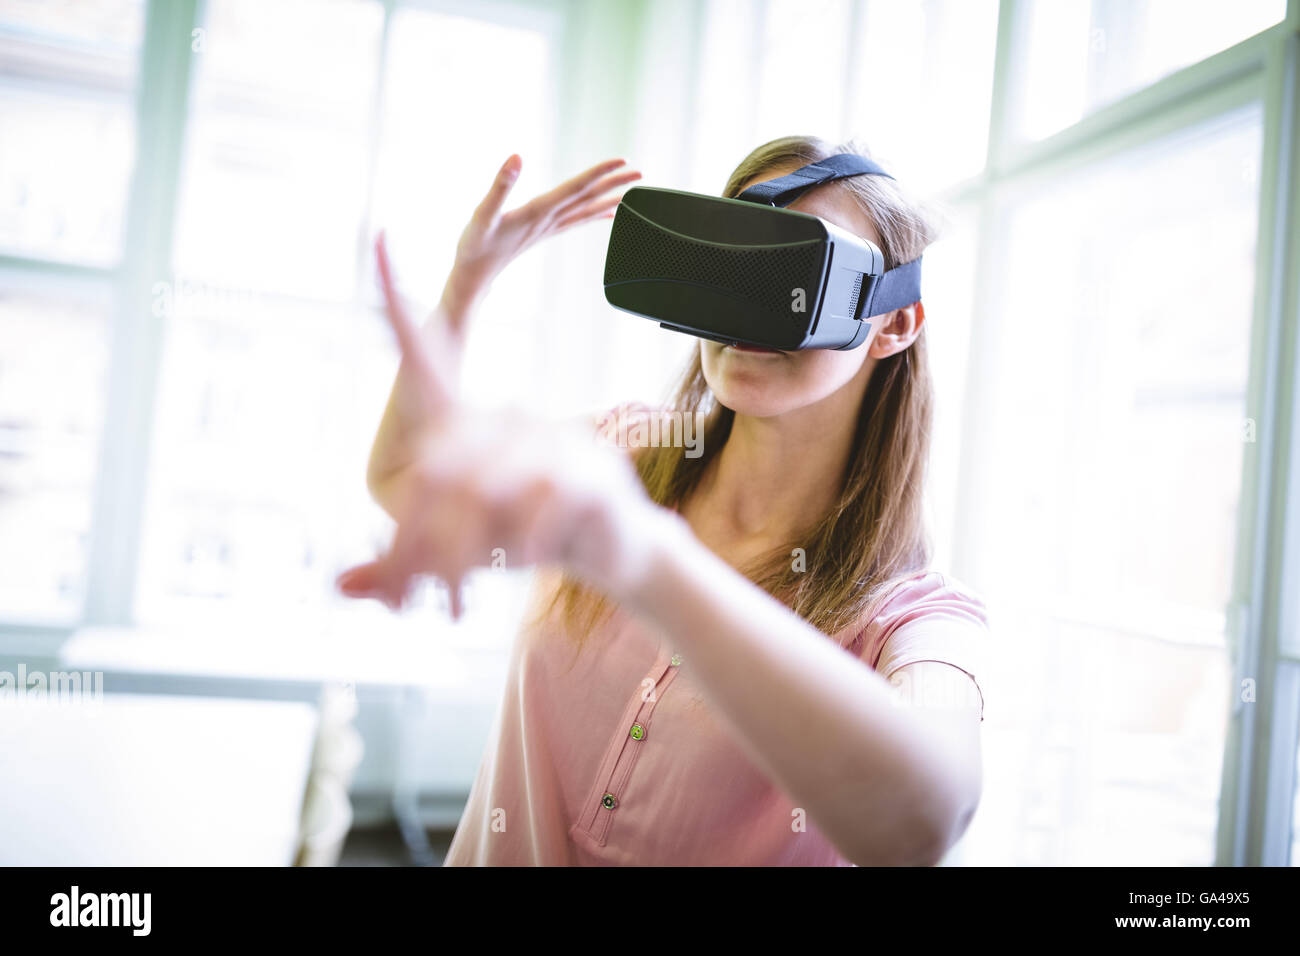 Graphic designer making hand actions while using virtual reality headset Stock Photo